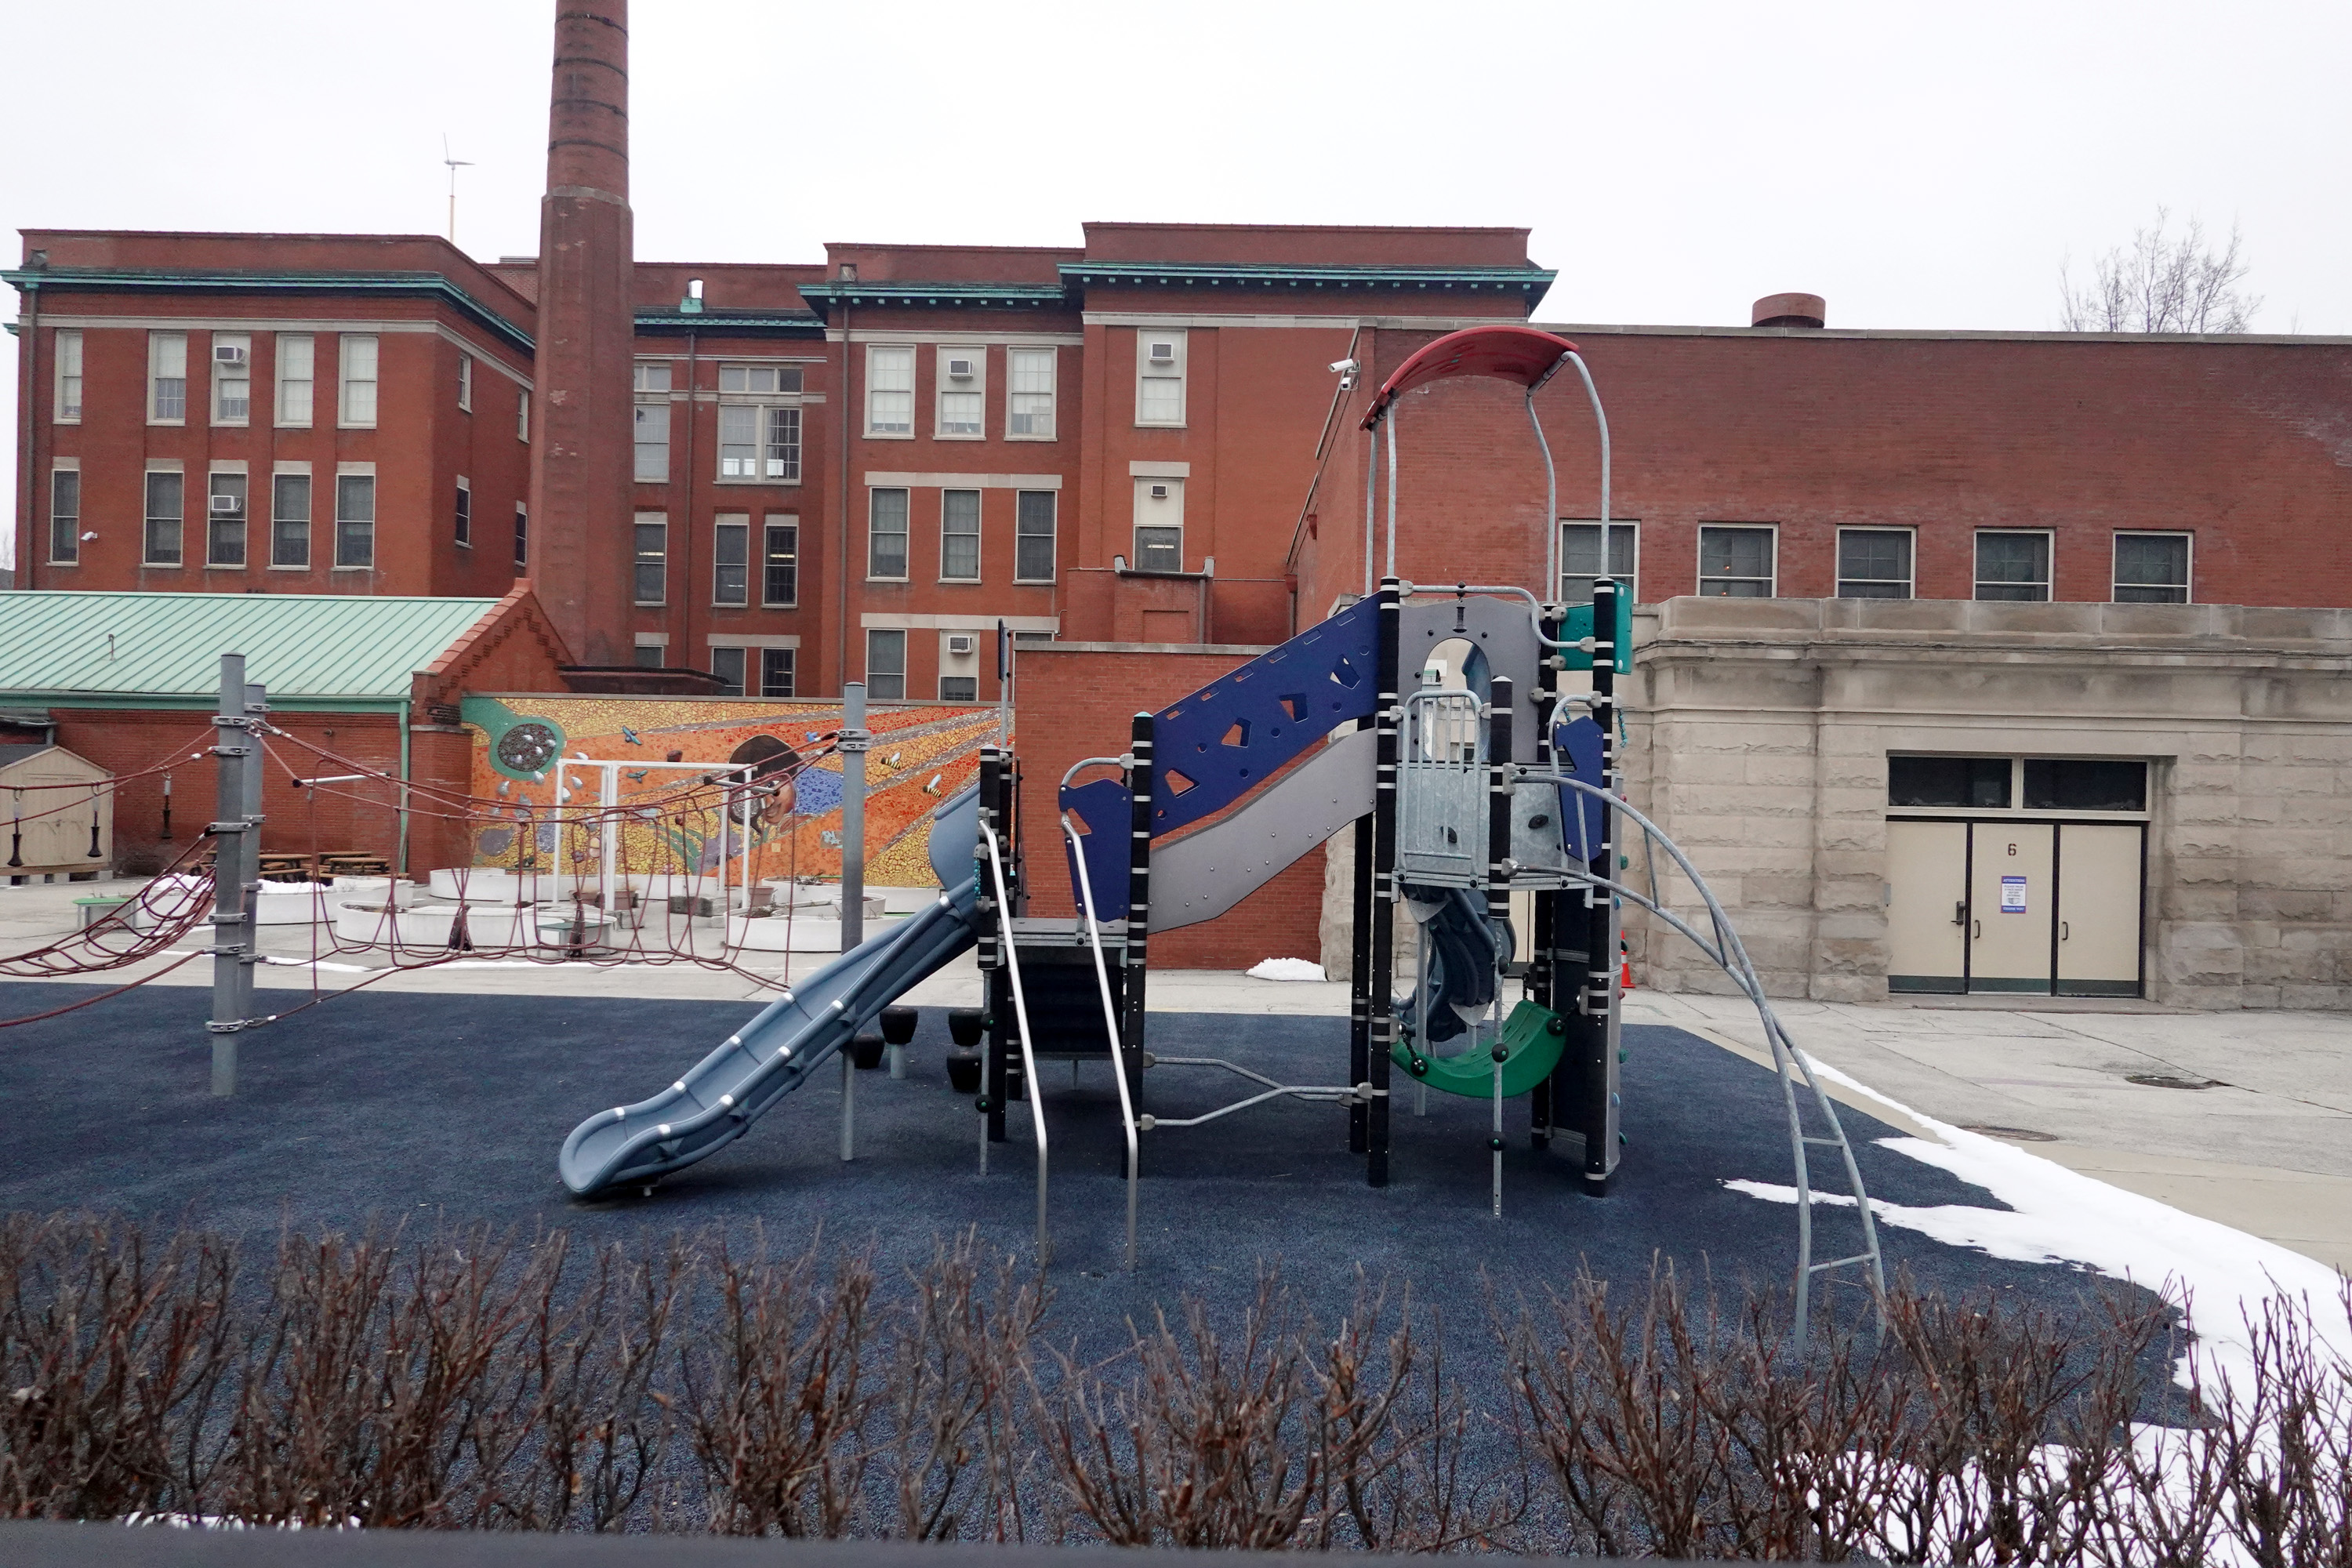 The playground was empty at Burr Elementary School in Chicago on Jan. 25, 2021, as the teachers' union and the city failed to reach agreement on the planned reopening of schools to in-person learning. (Scott Olson—Getty Images)